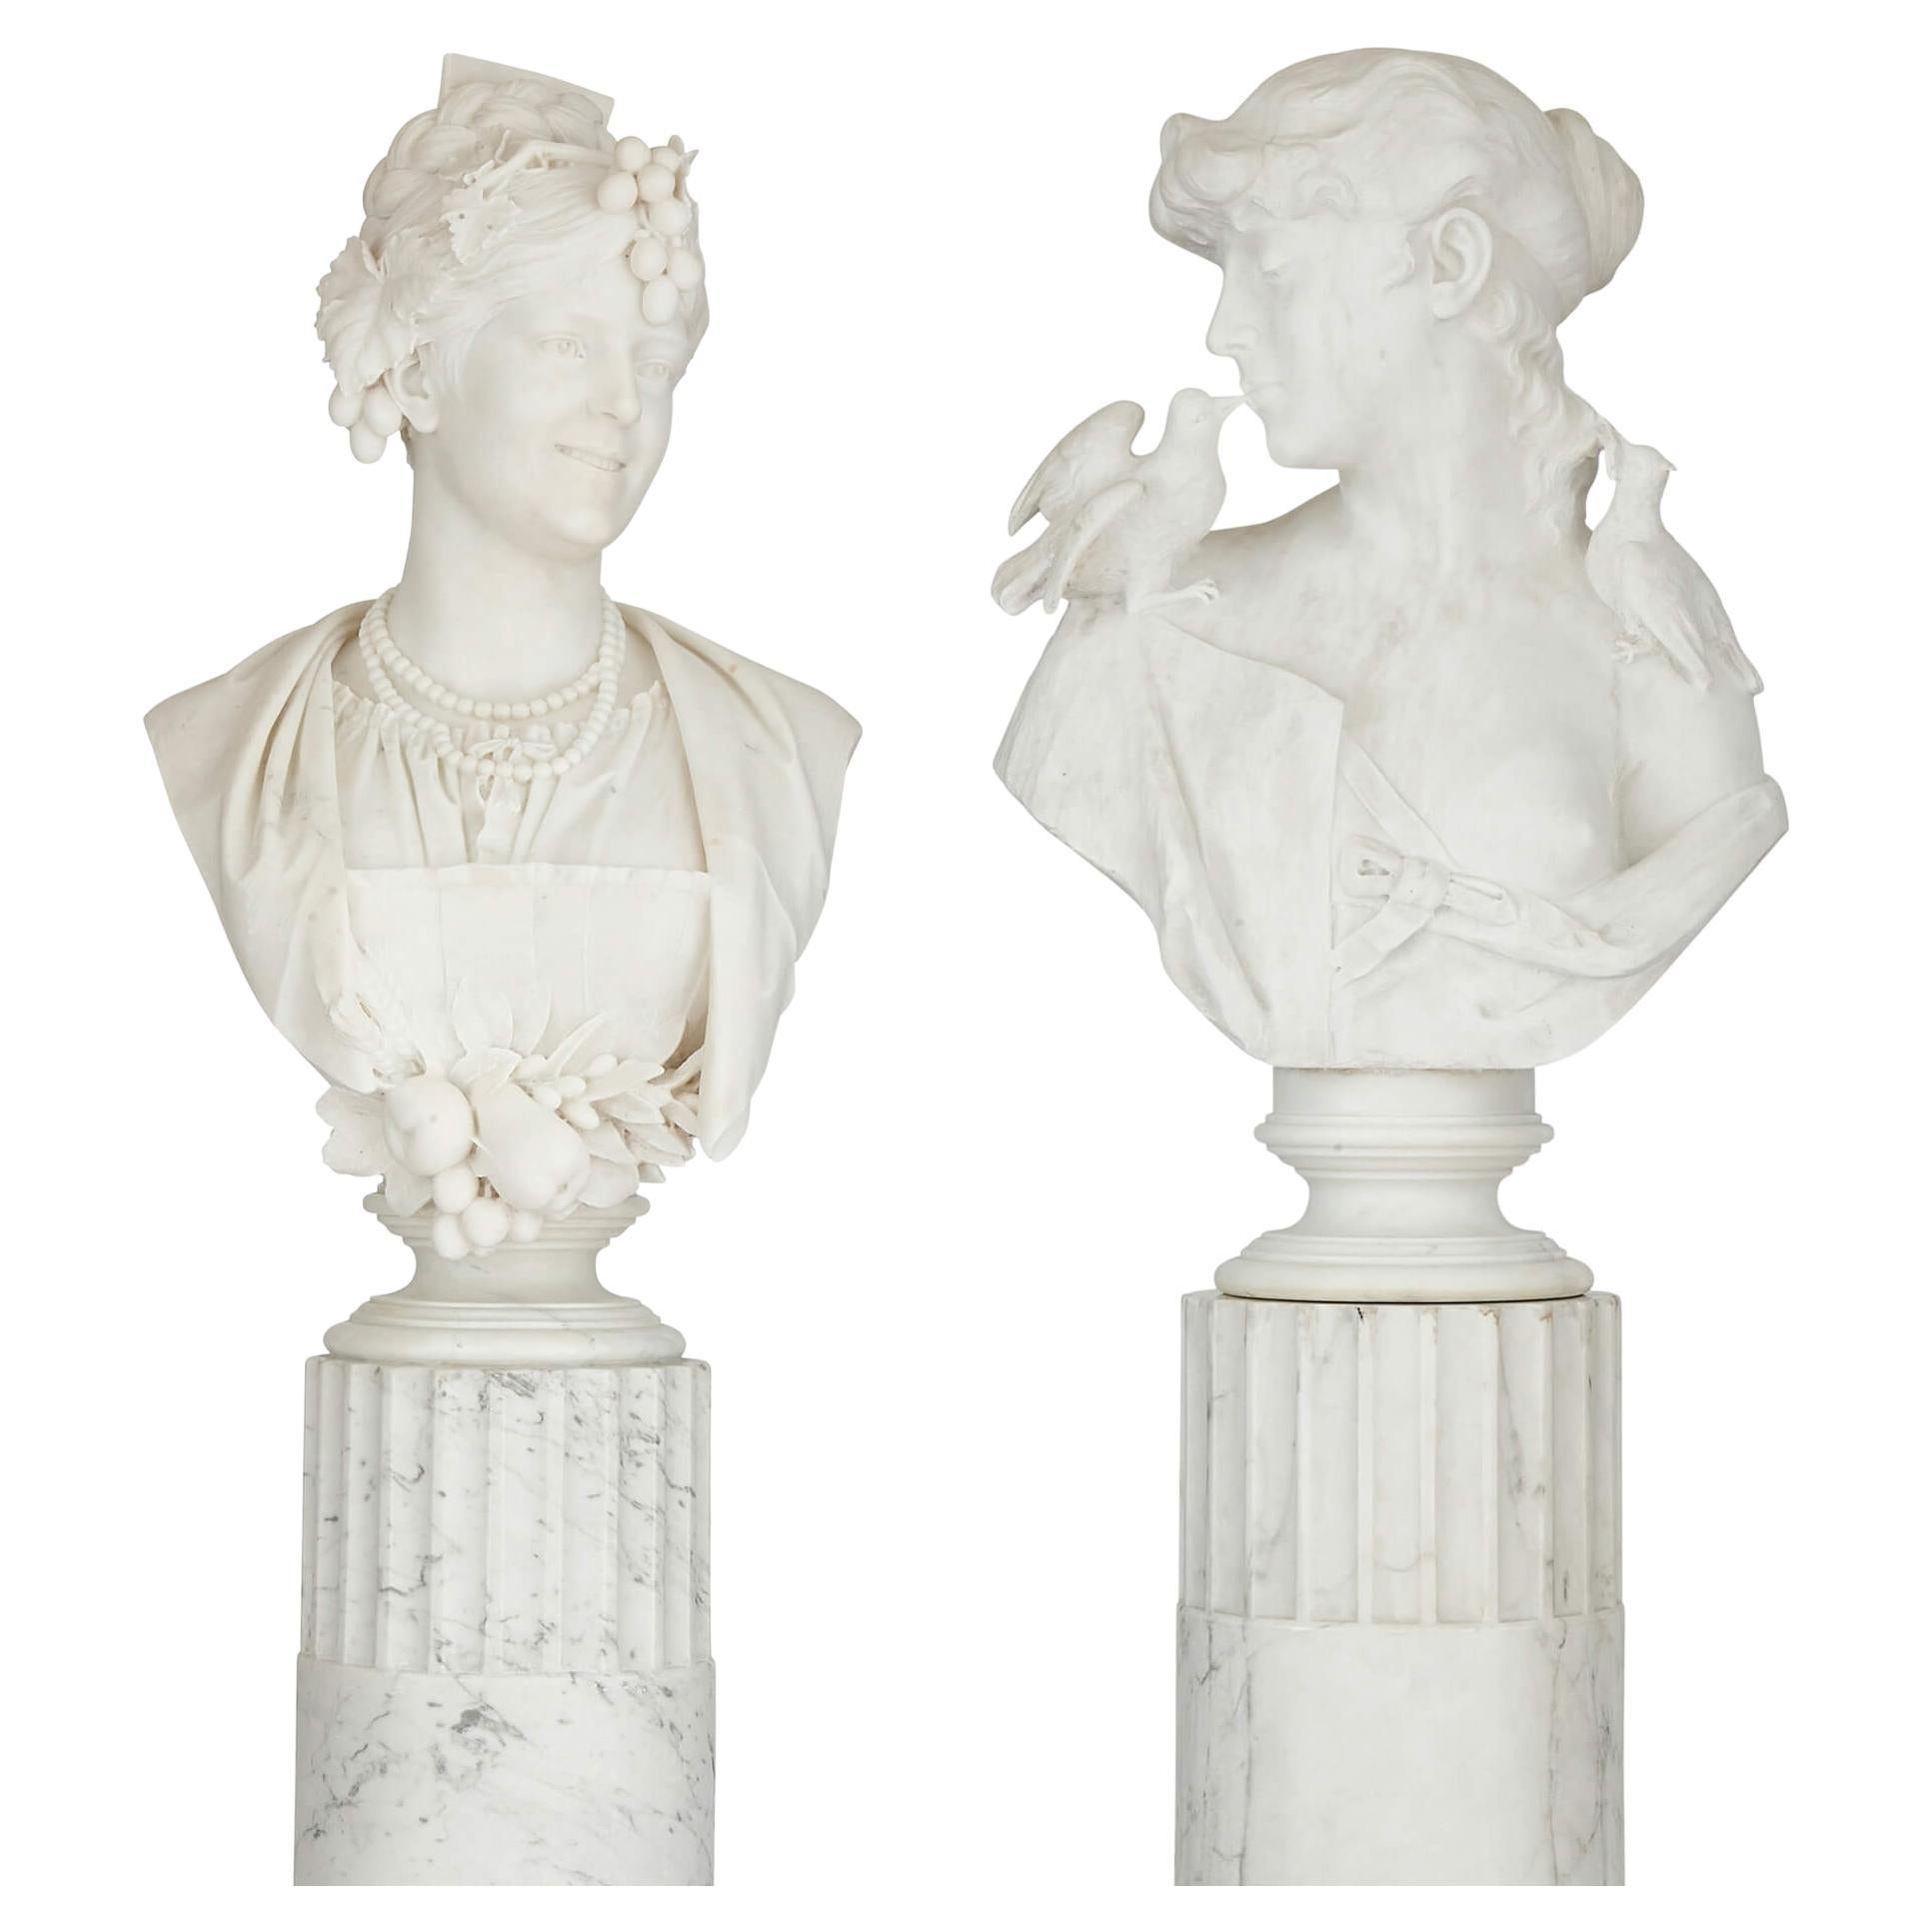 Pair of Carved Marble Busts on Stands by Italian Sculptor Arnaldo Fazzi For Sale